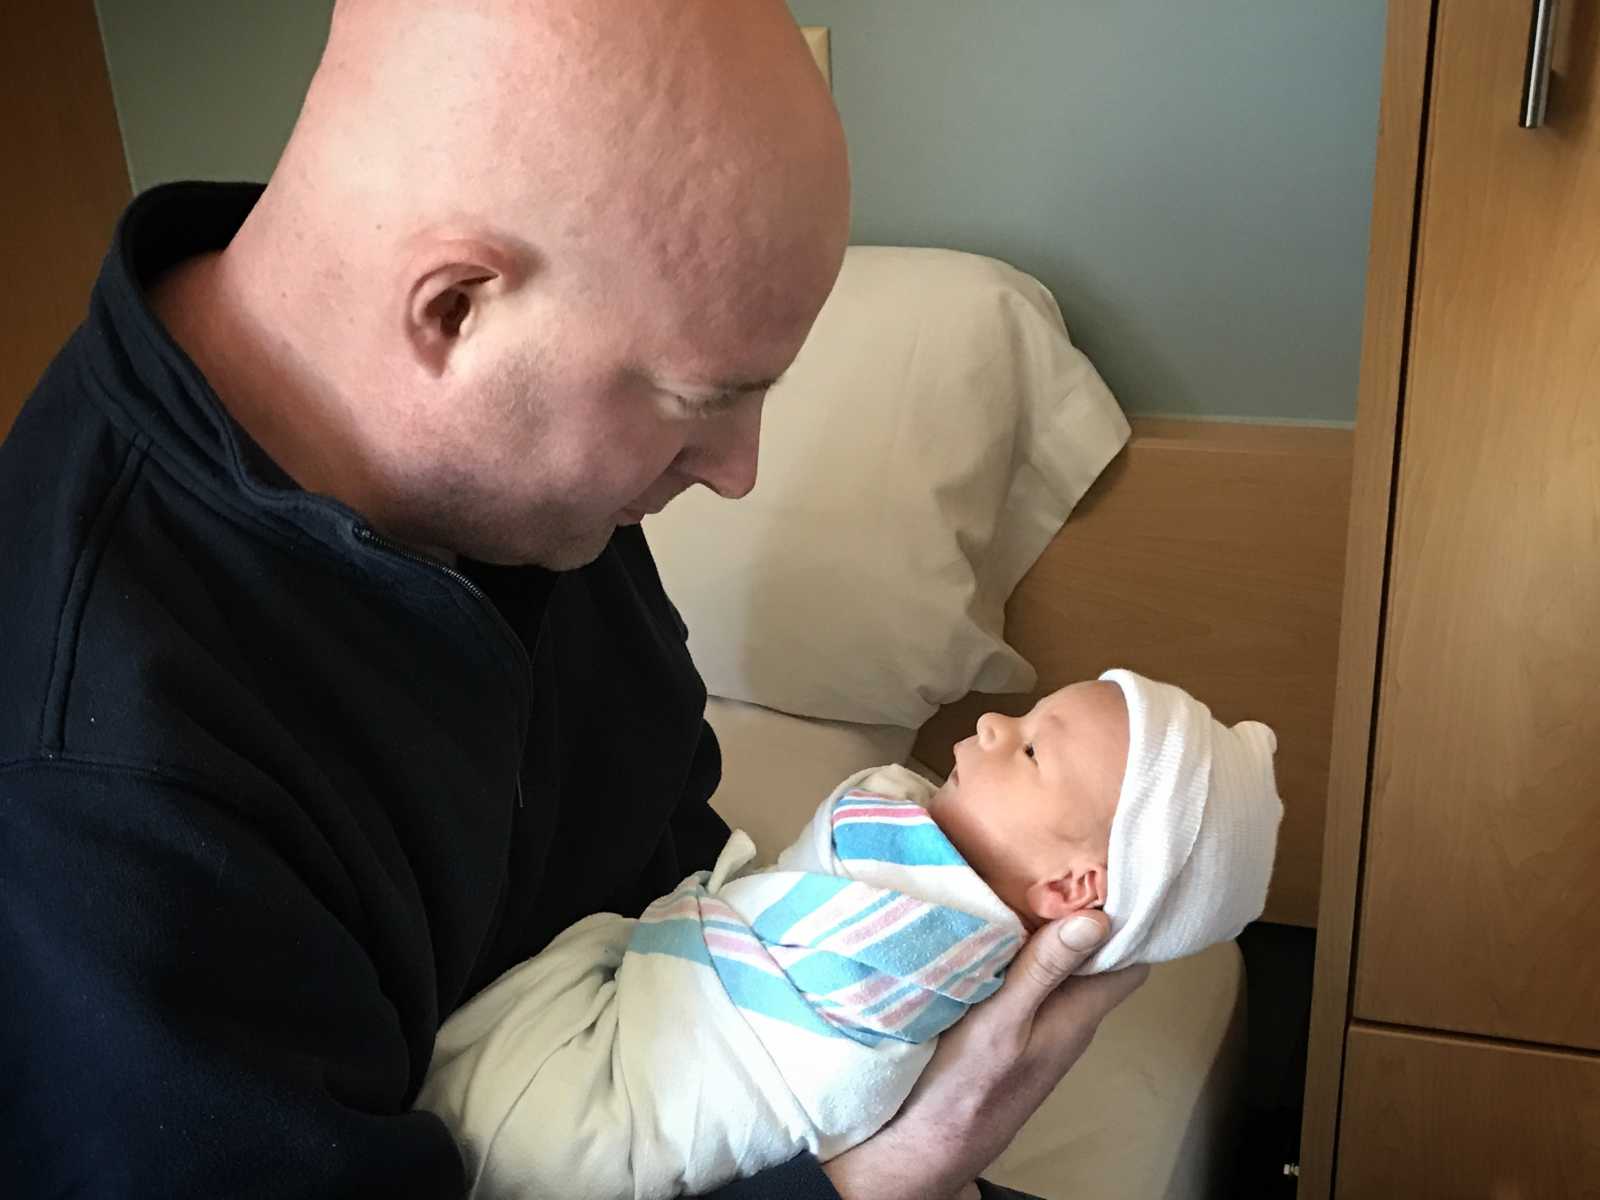 brain cancer patient holds his newborn son who is swaddled in blanket and wearing white hat